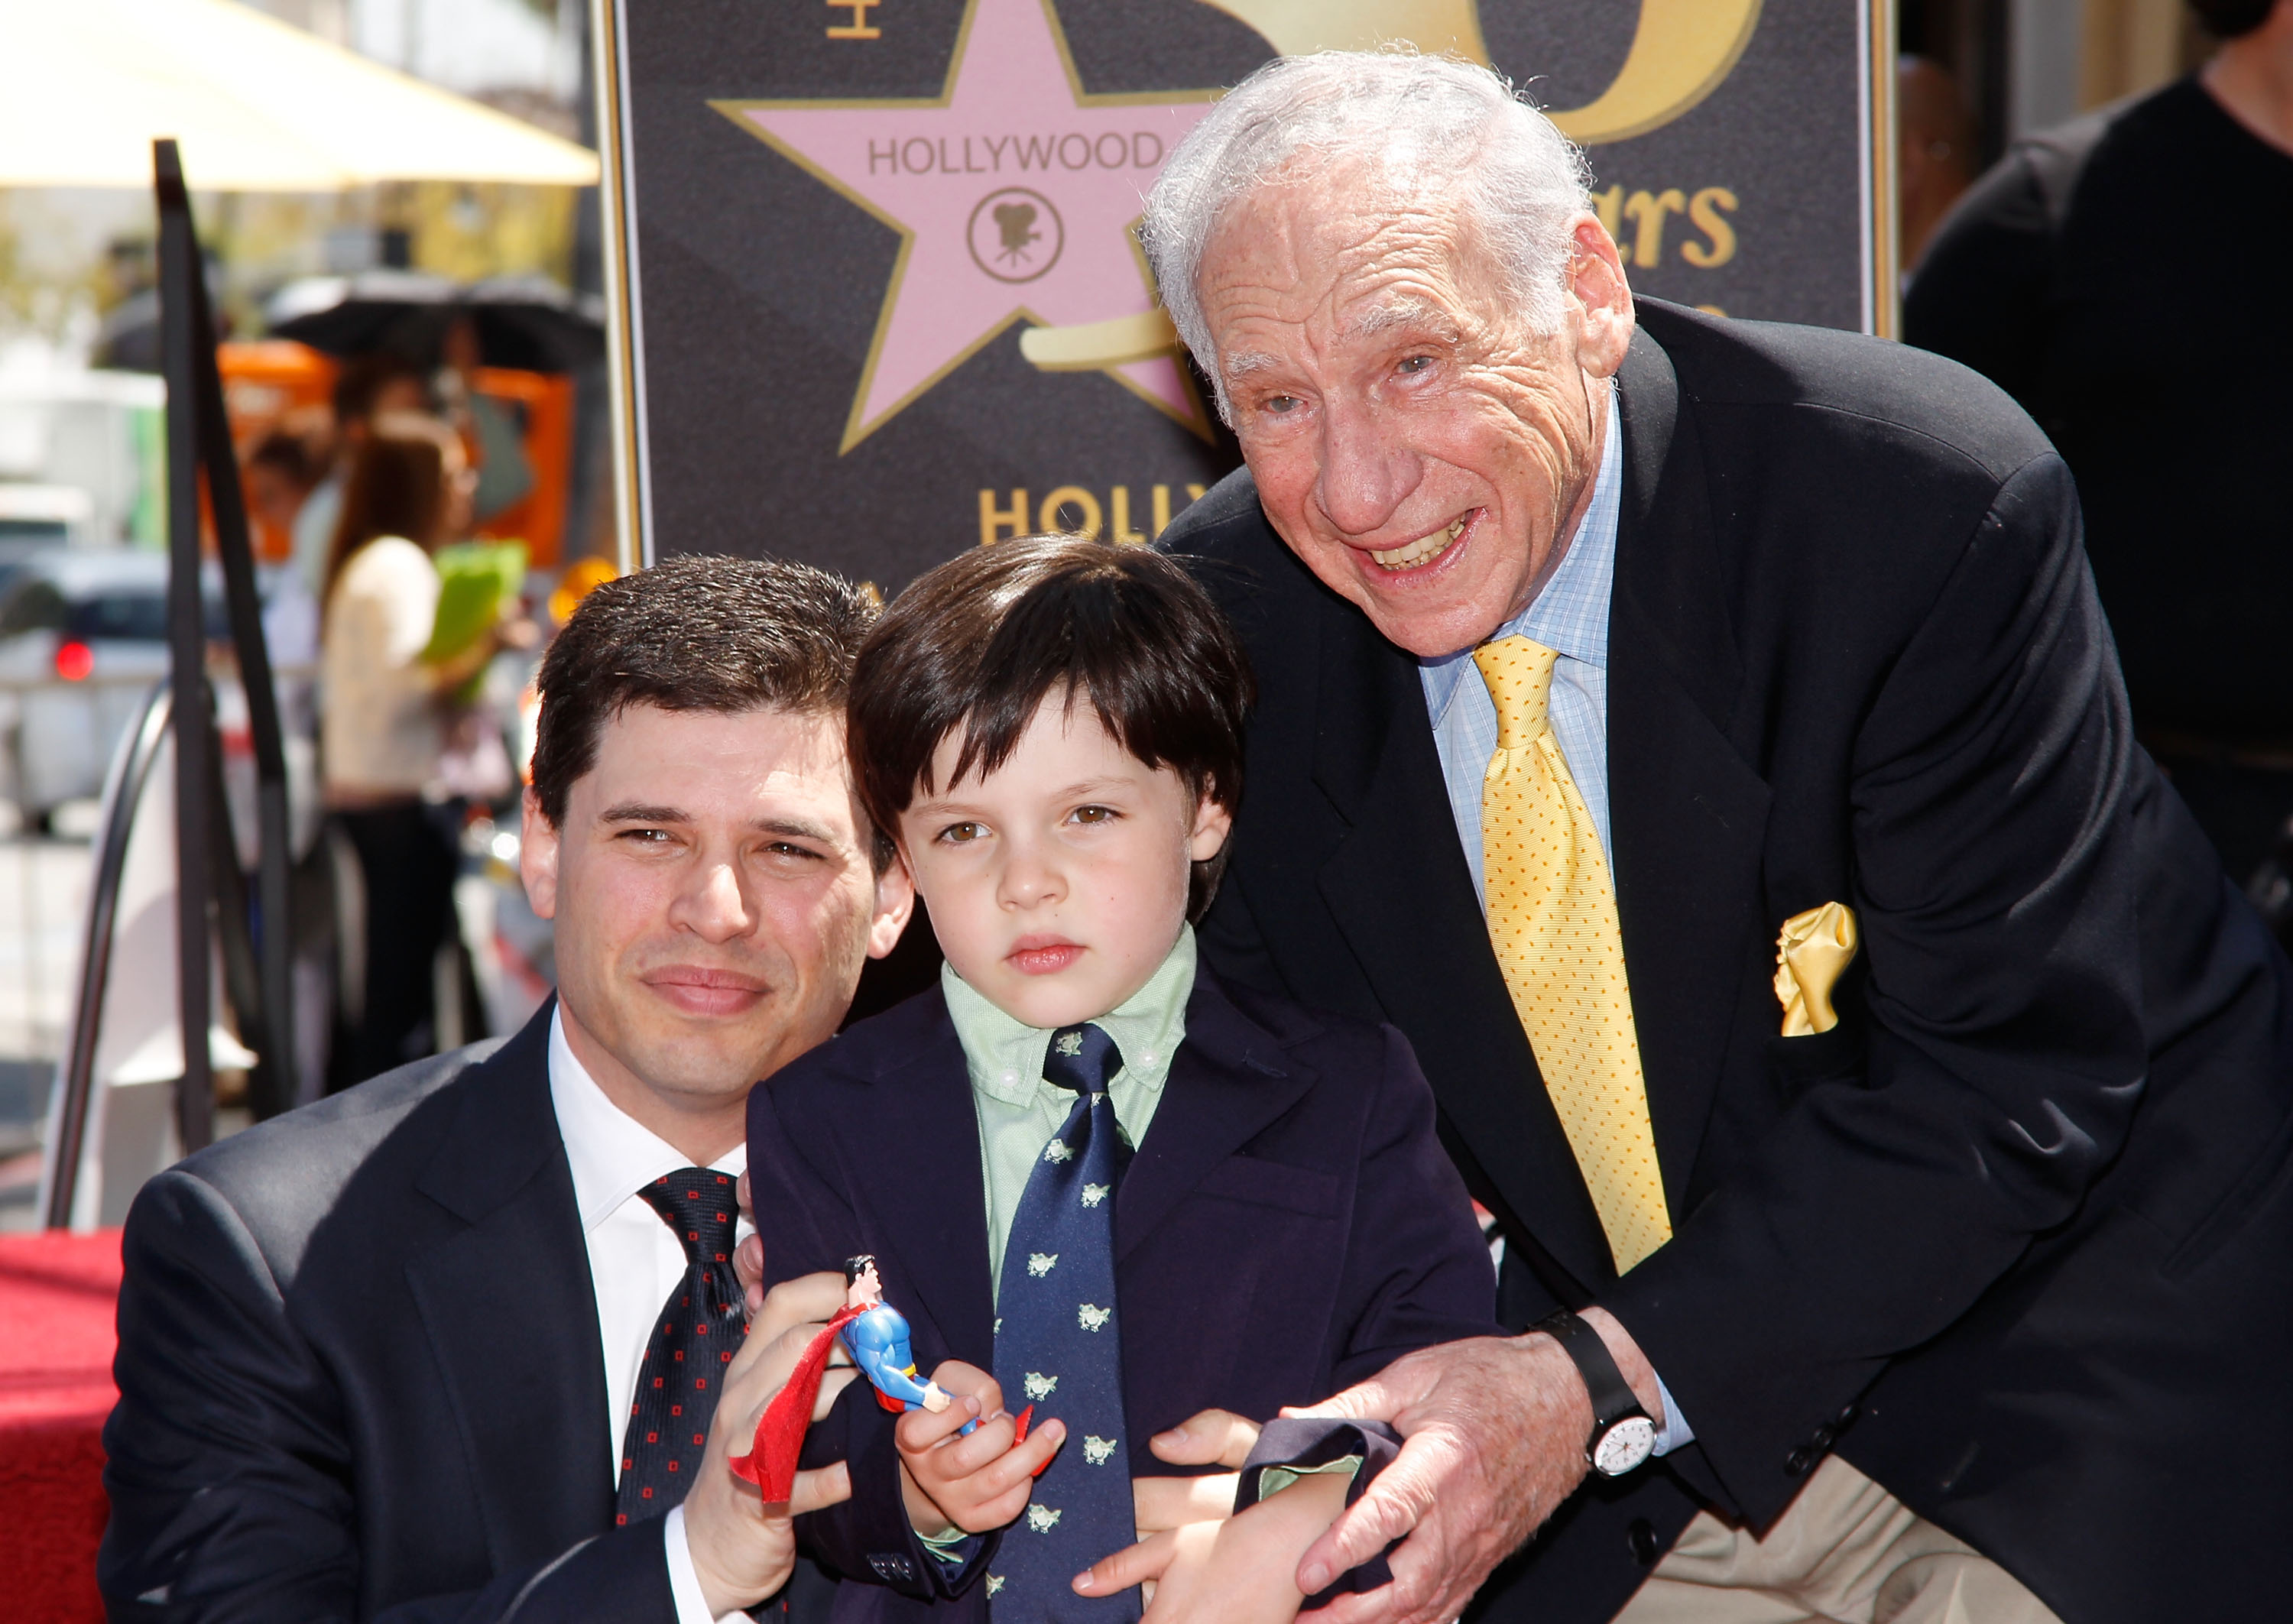 Max Brooks, Henry Brooks, and Mel Brooks on April 23, 2010, in Hollywood, California. | Source: Getty Images